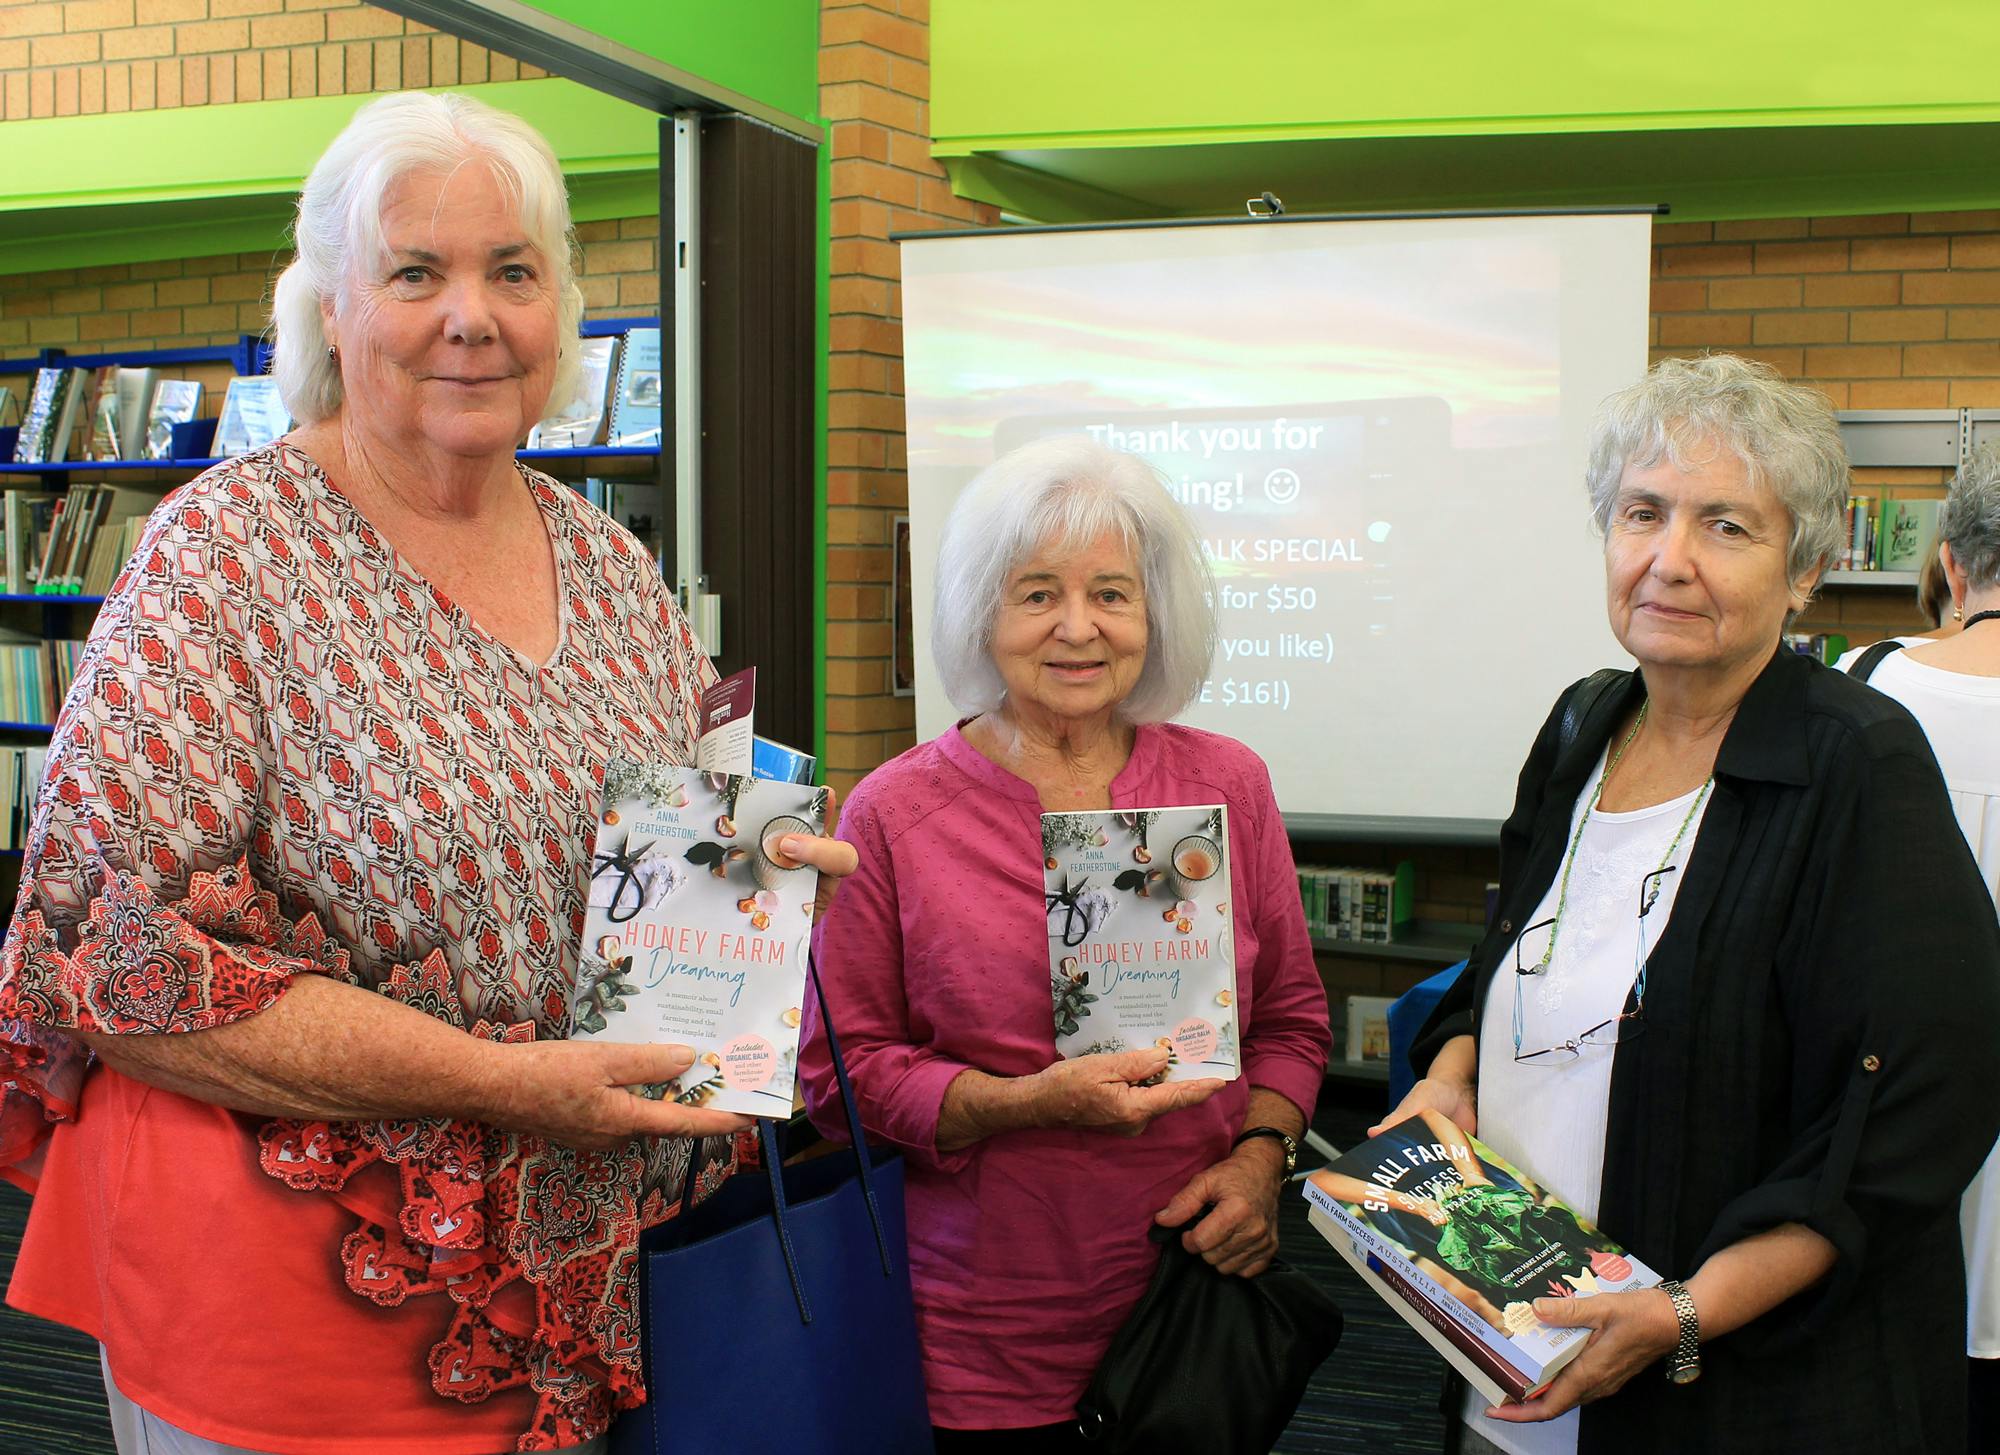 Audience members from the Anna Featherstone Author Talk at Kempsey Shire Library